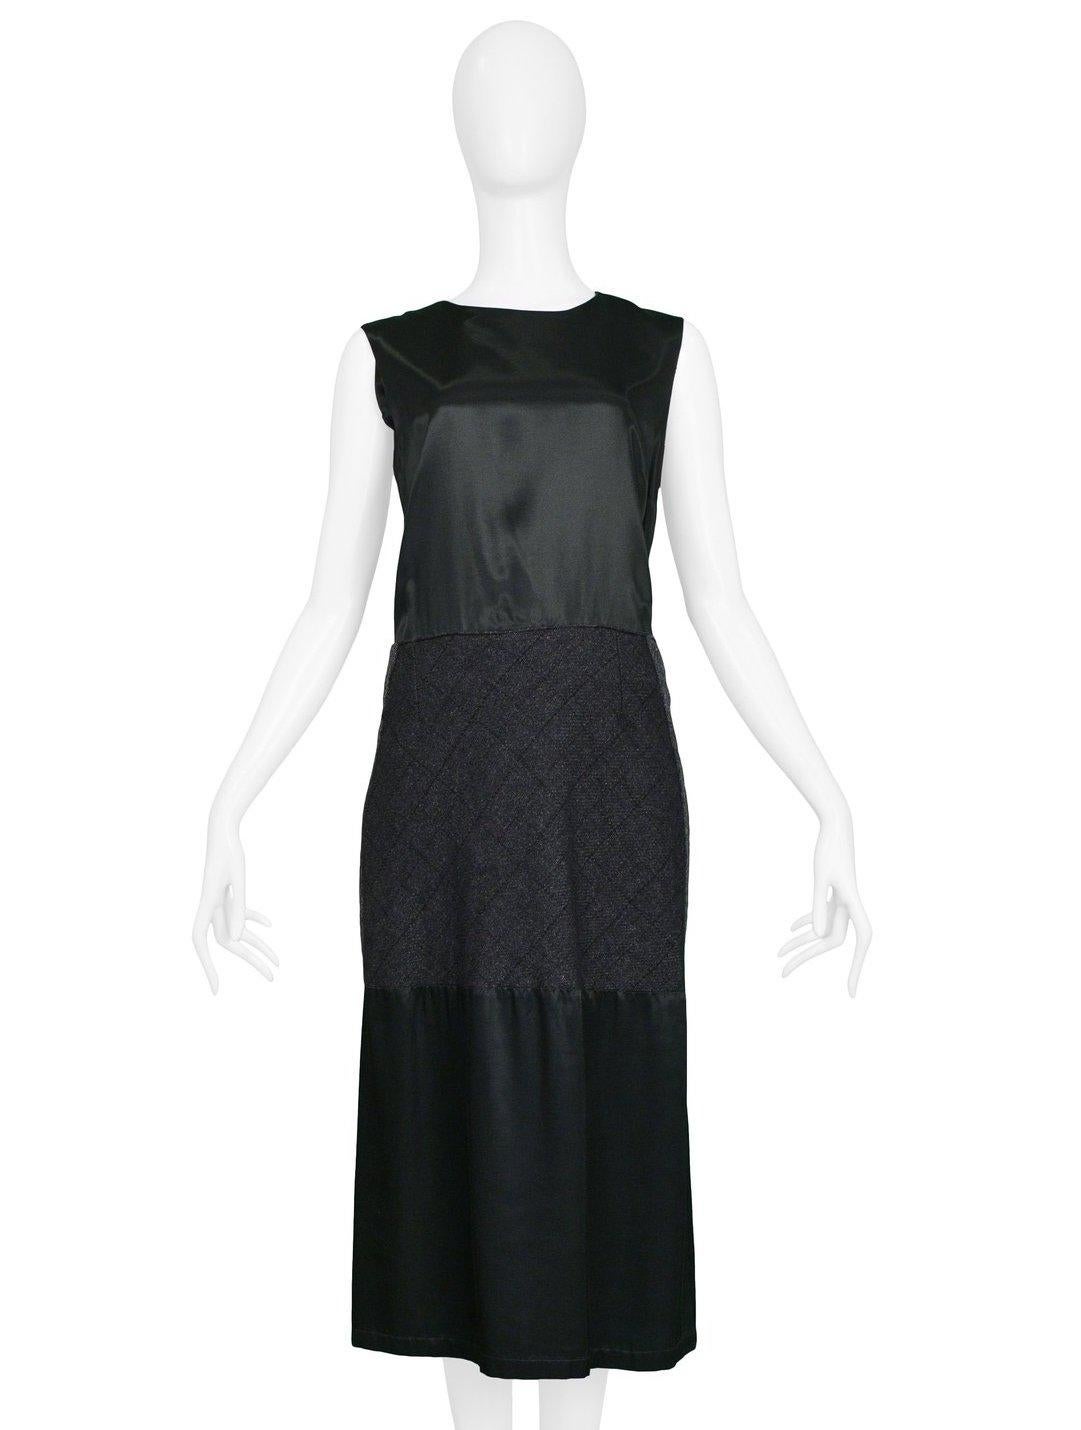 Resurrection Vintage is excited to offer a vintage Maison Martin Margiela artisanal reconstructed sleeveless dress featuring two black satin fabric panels at the torso and hem, a center wool panel covering the waist and hips. The dress features a